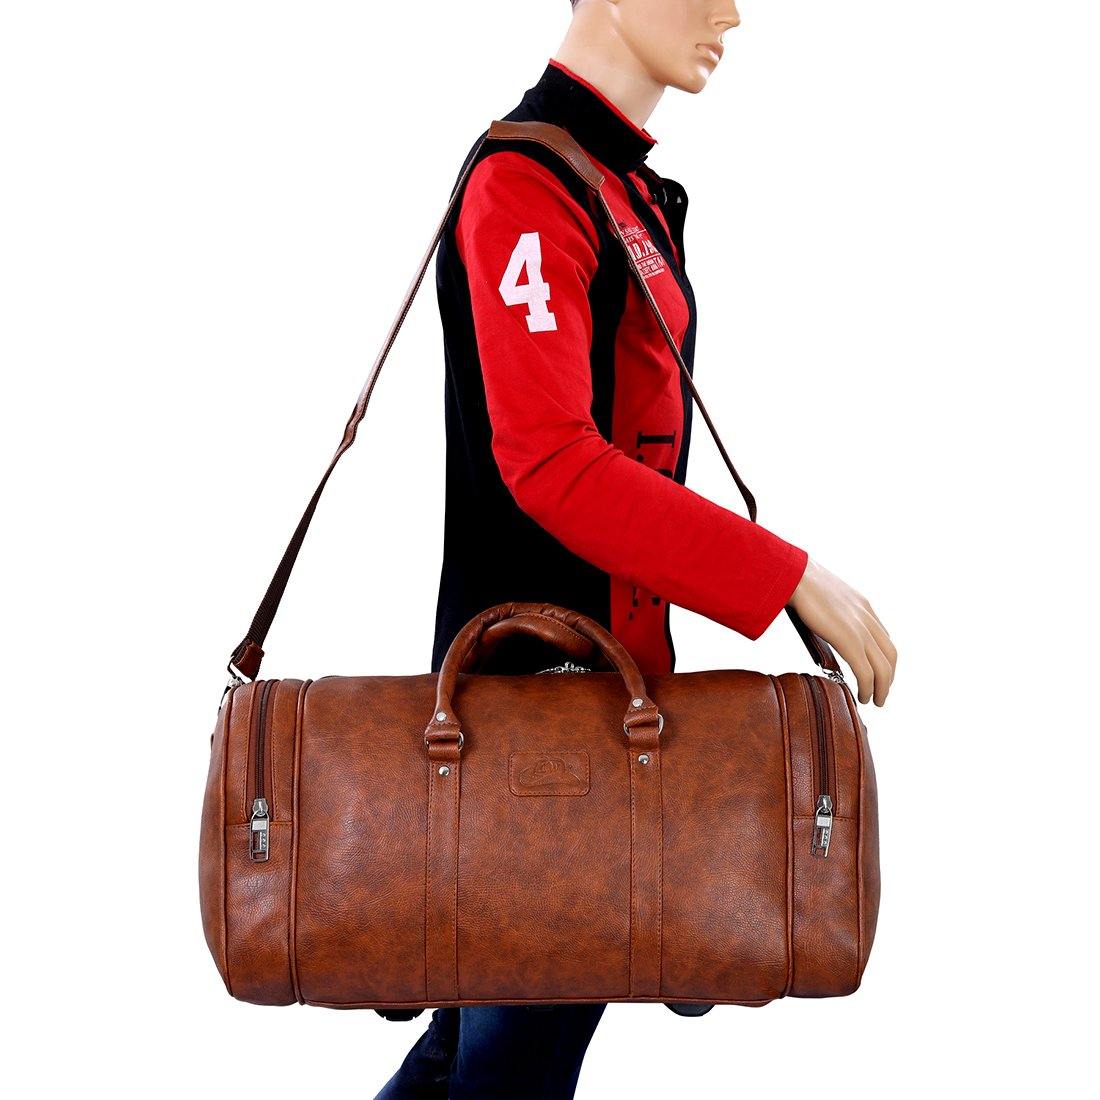 Luxurious Synthetic Leather Cabin Luggage Travel Duffel Bag